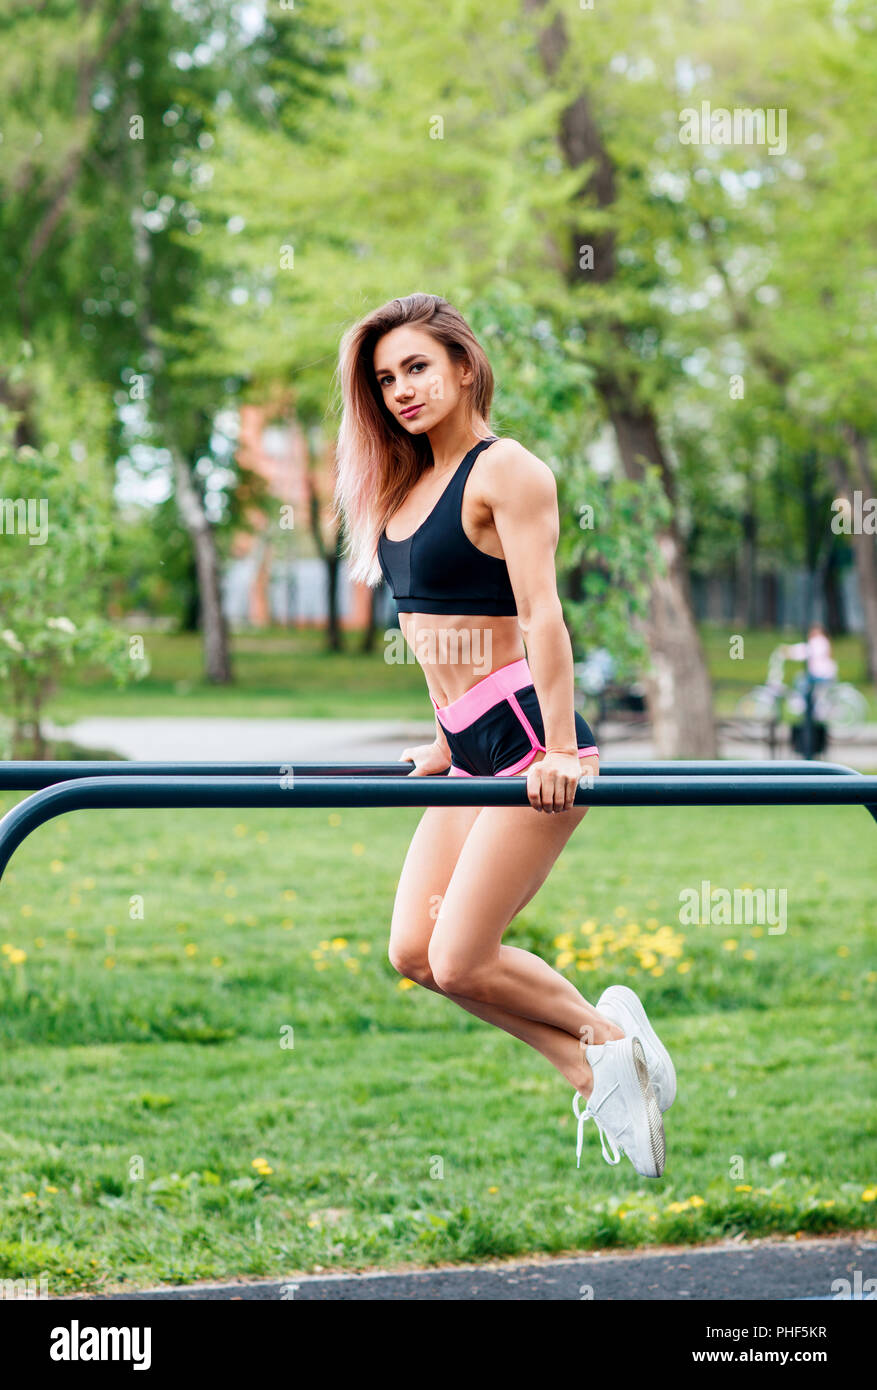 Woman pull-ups herself up on bar on sports ground in park. Stock Photo